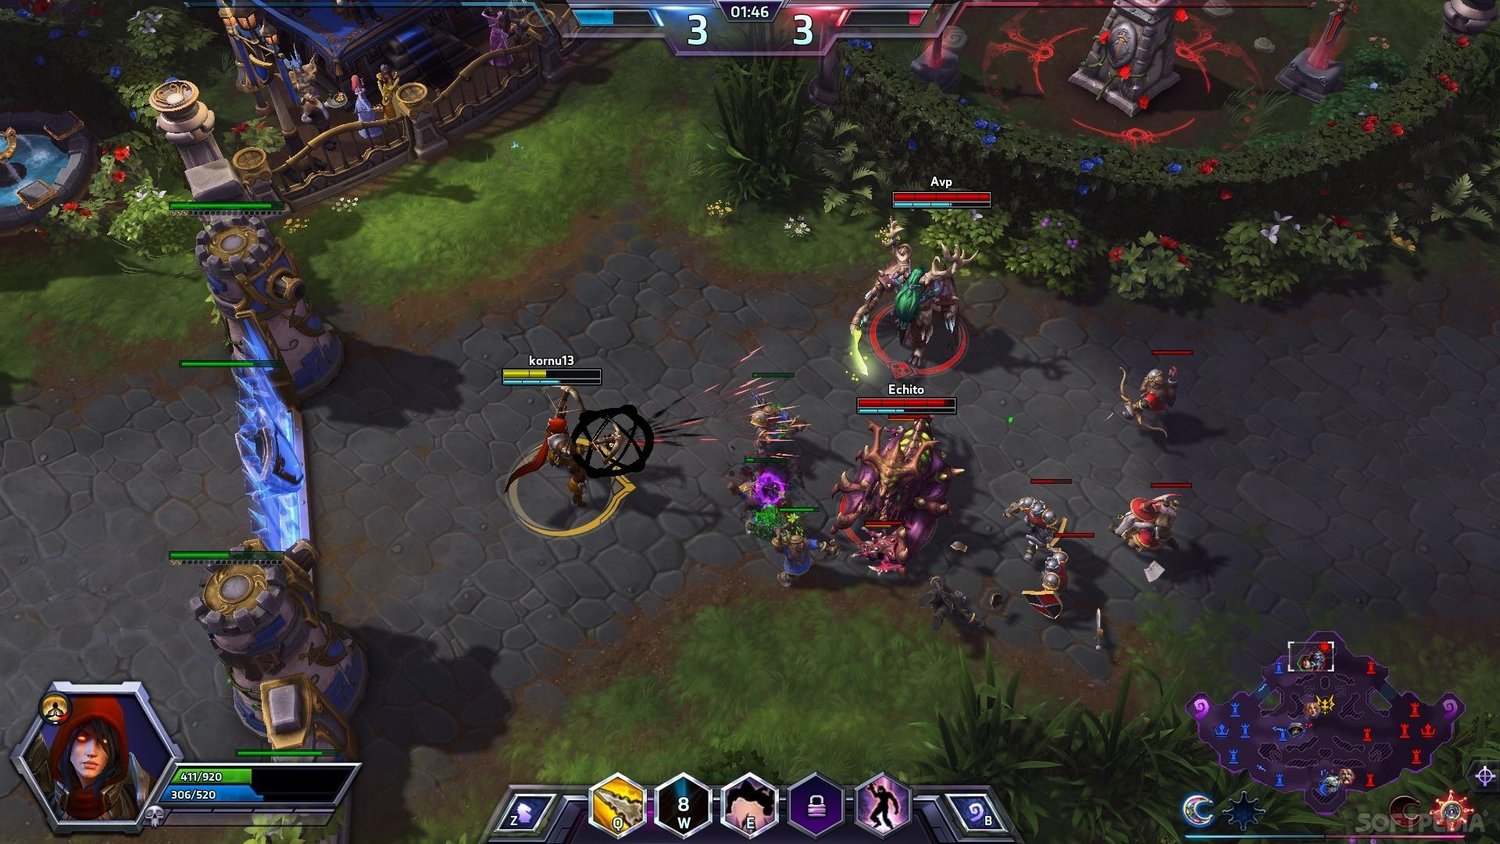 You Can Unlock 20 HEROES OF THE STORM Champions Just By Logging In